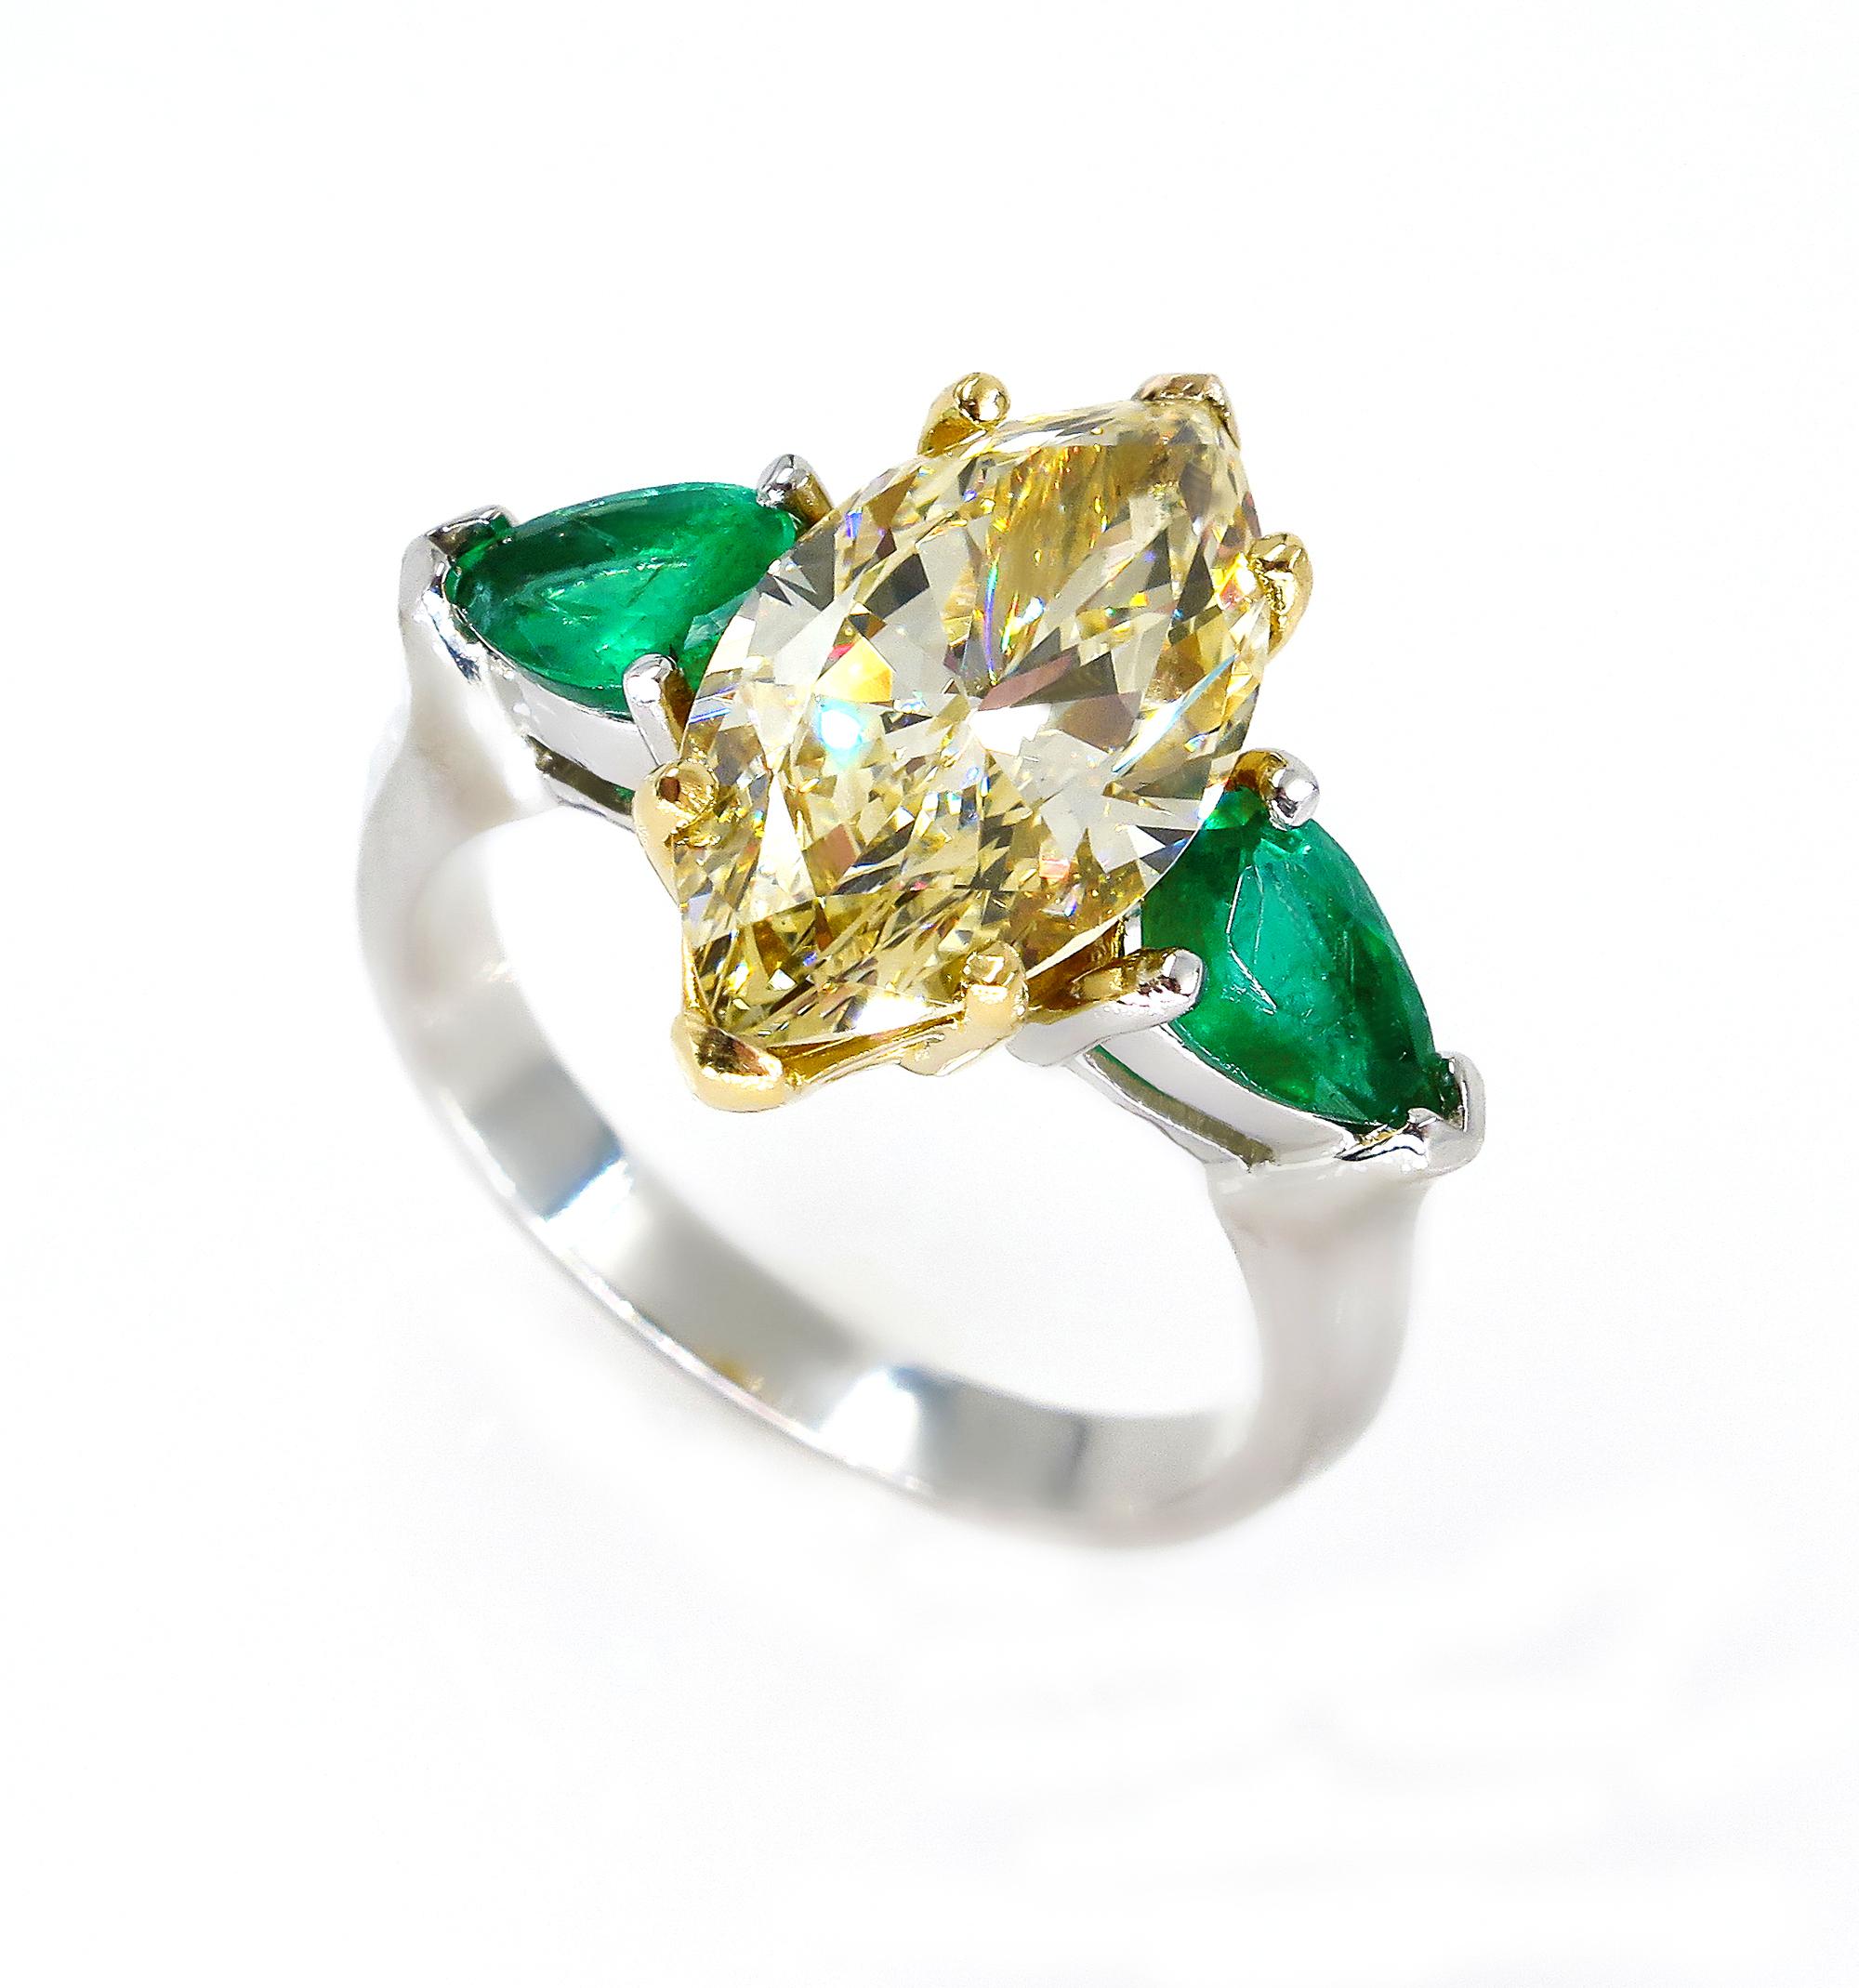 The Ultimate Luxury. A SUPER RARE Find for Diamond Lovers or Rare Gems Collectors! Spectacular Trilogy Large Fancy Yellow Marquise Shape Diamond and Green Emerald Ring in Platinum and 18k Gold.

More rare than a colorless diamond, a fancy color